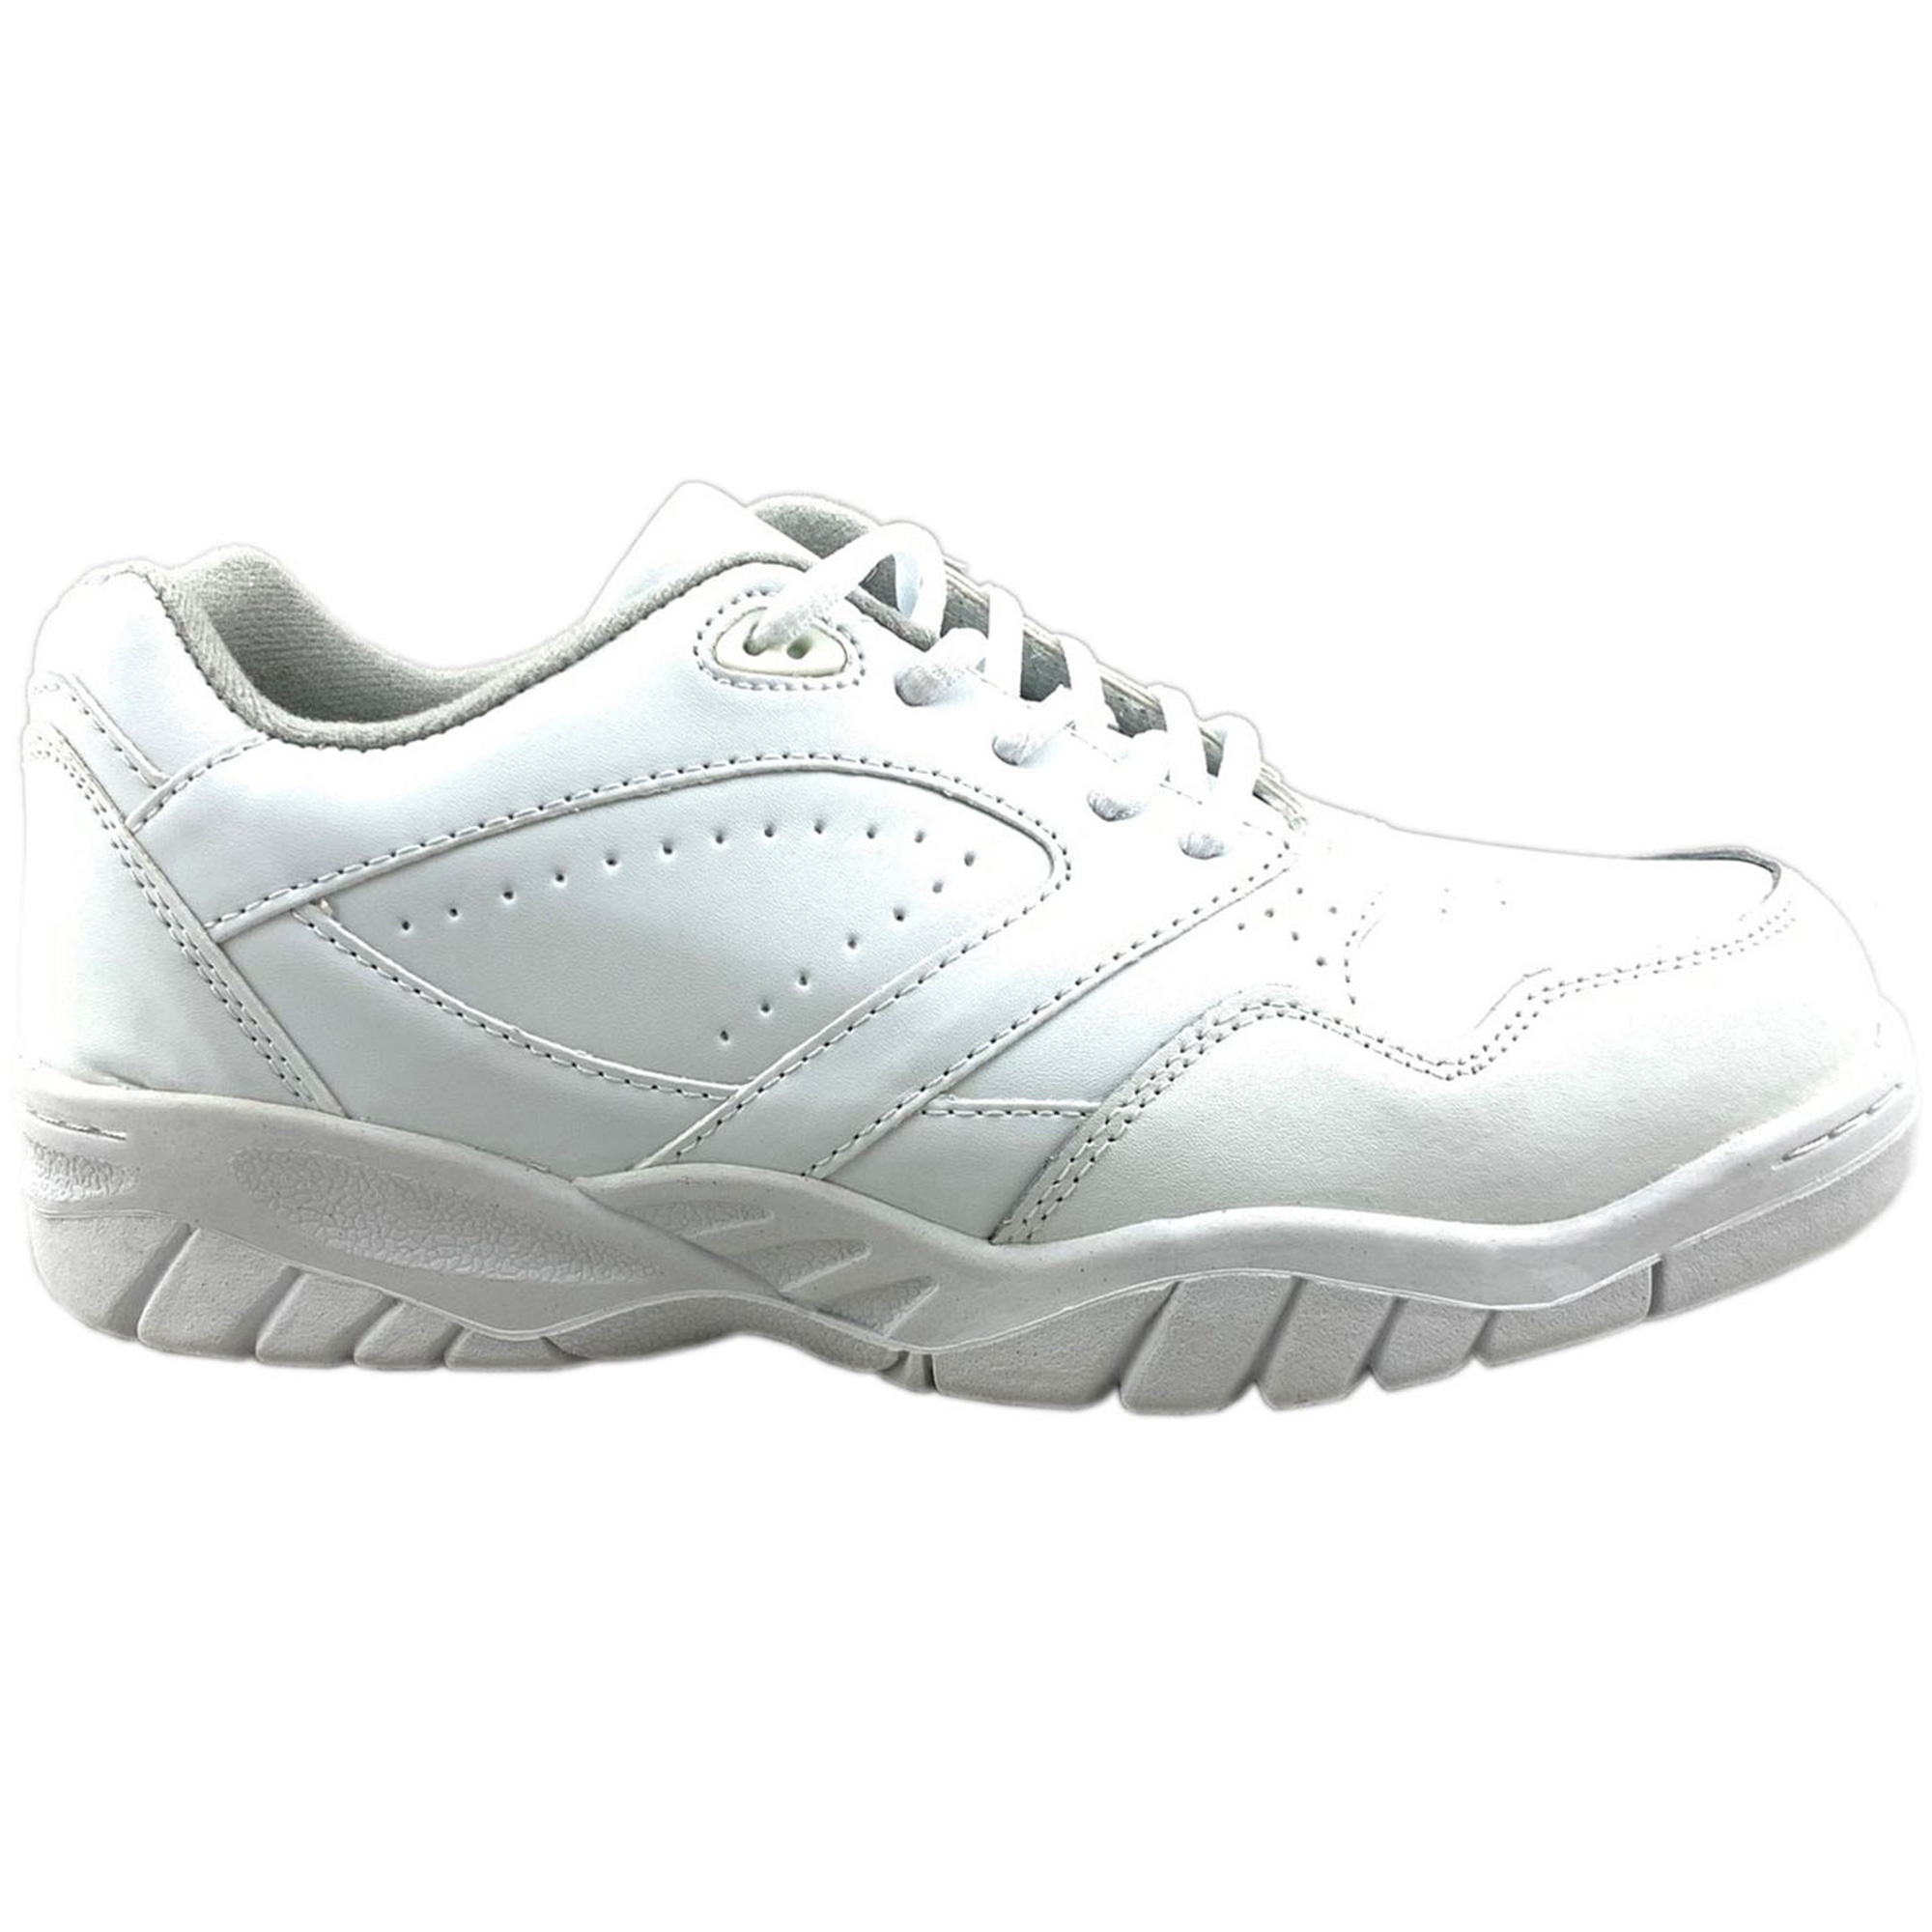 Tanleewa Men's Leather White Sports Shoes Lightweight Sneakers Breathable Casual Shoe Size 3 - image 1 of 5